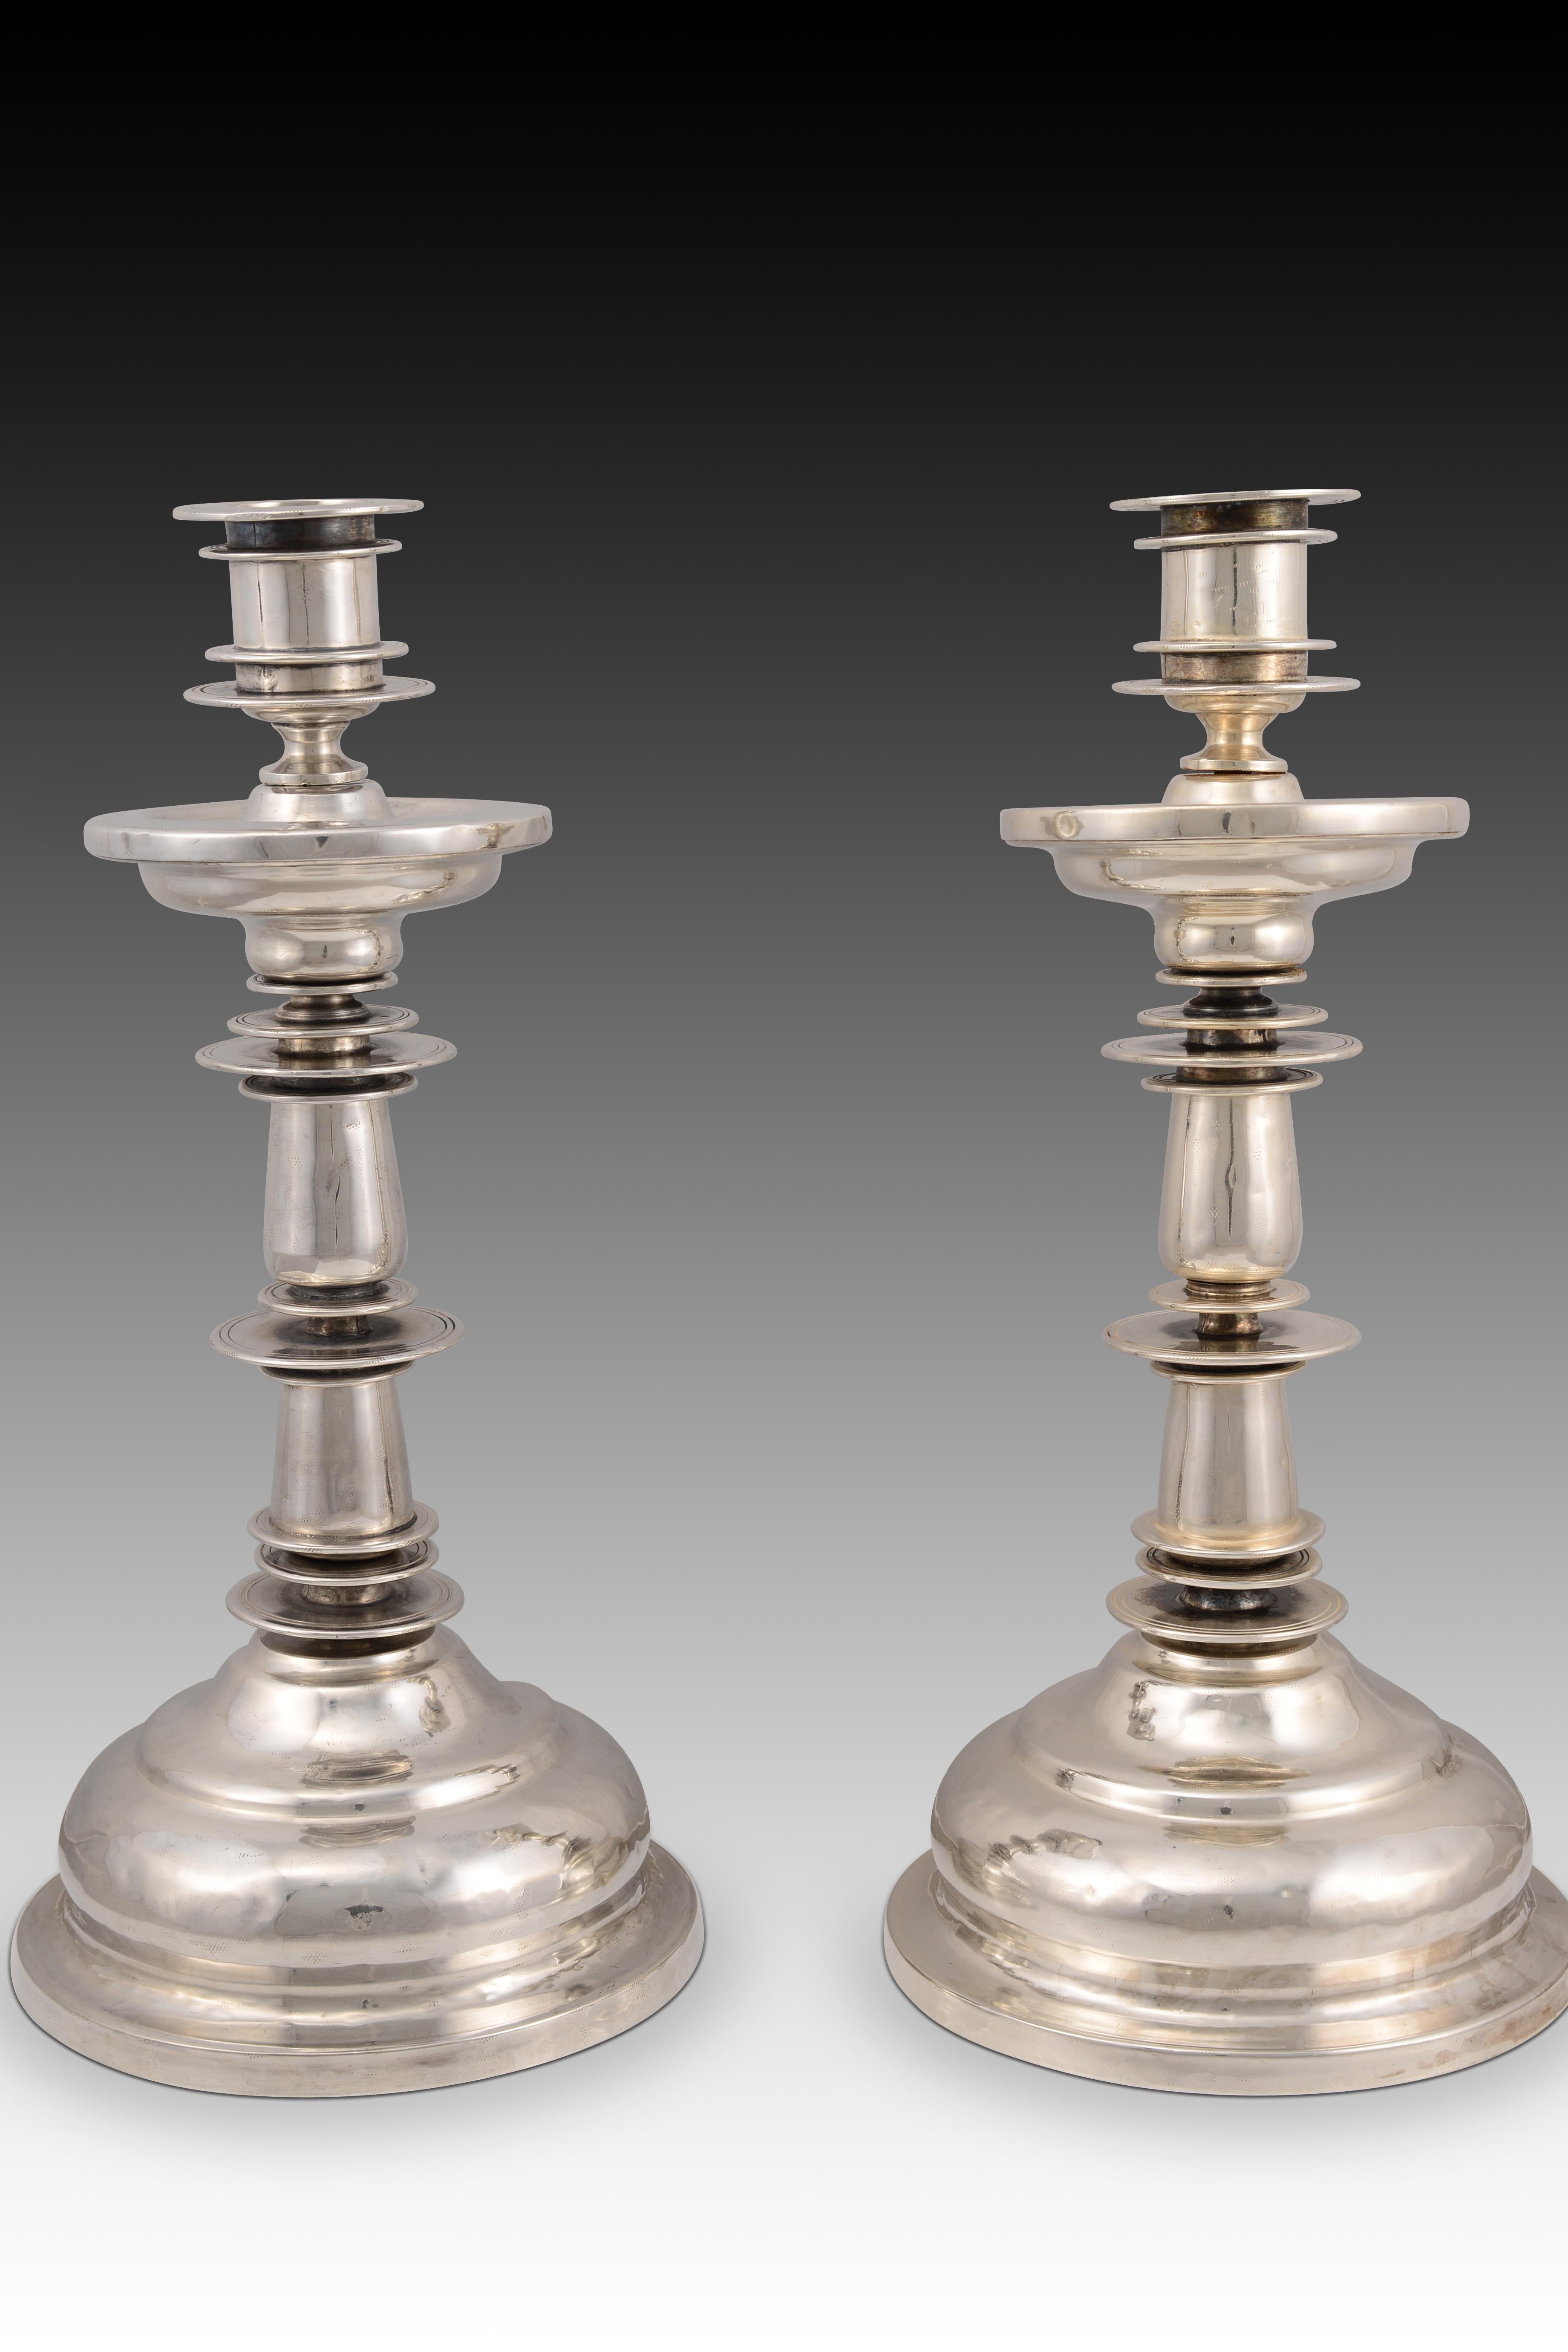 Pair of silver candlesticks. Century XVIII.
 Pair of candlesticks made of silver in an unadorned baroque style, with a clean and dynamic structure that expresses itself through the contrasting superposition of circular section elements. The lines